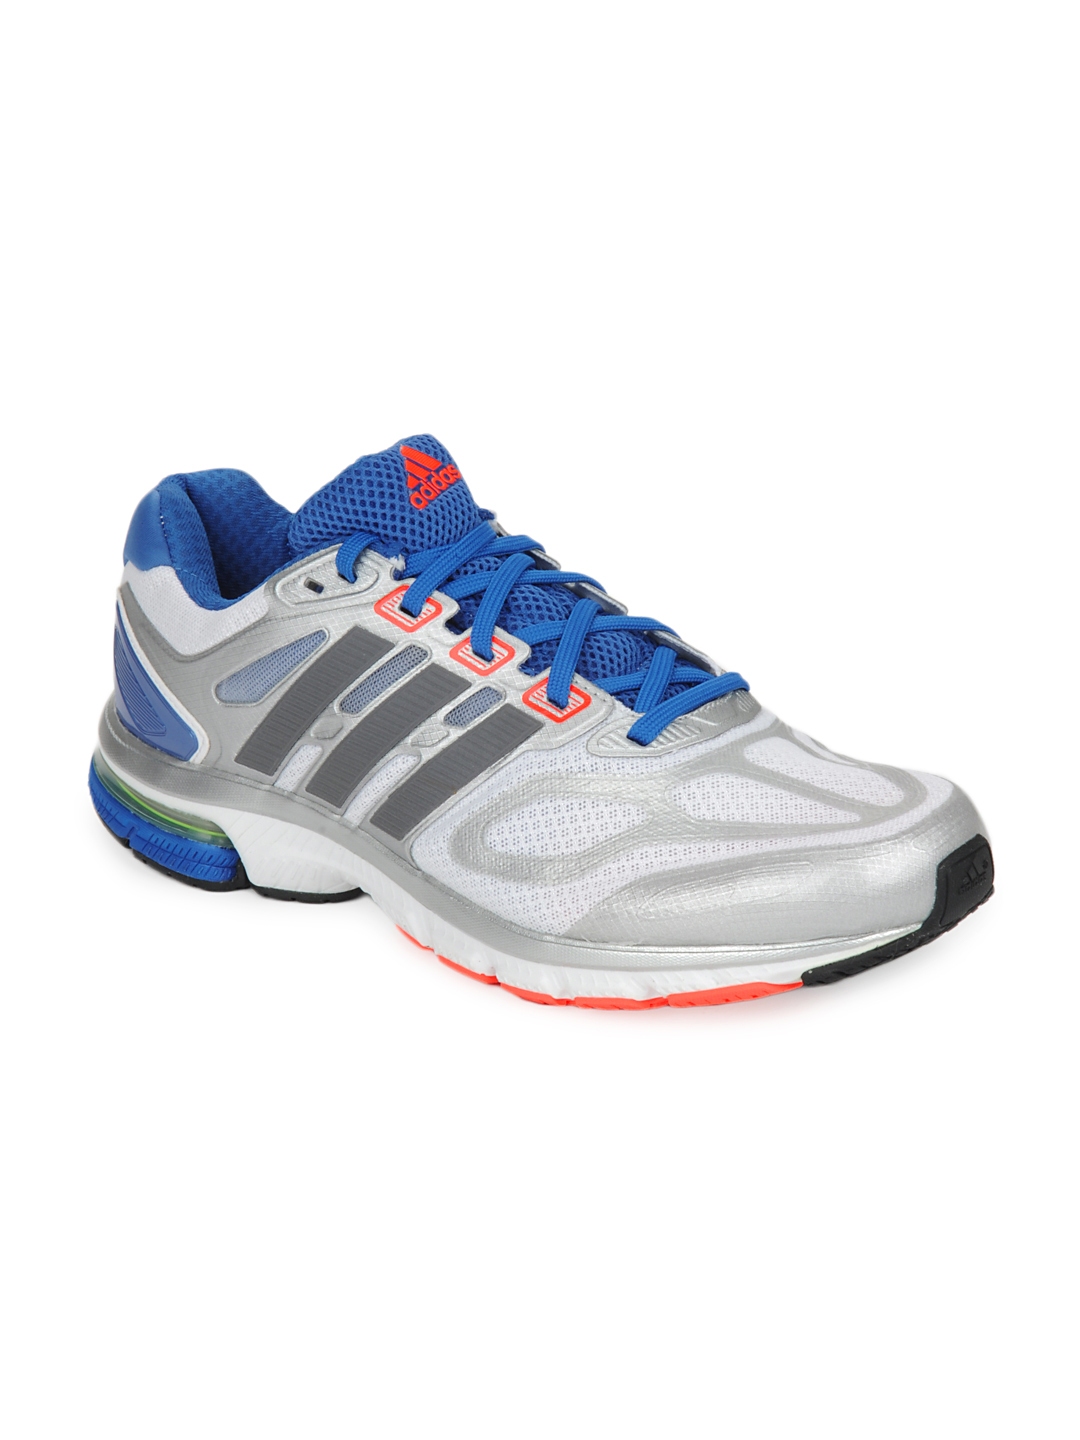 Buy Adidas Men White Supernova Sequence 6 M Running Shoes - Sports ...